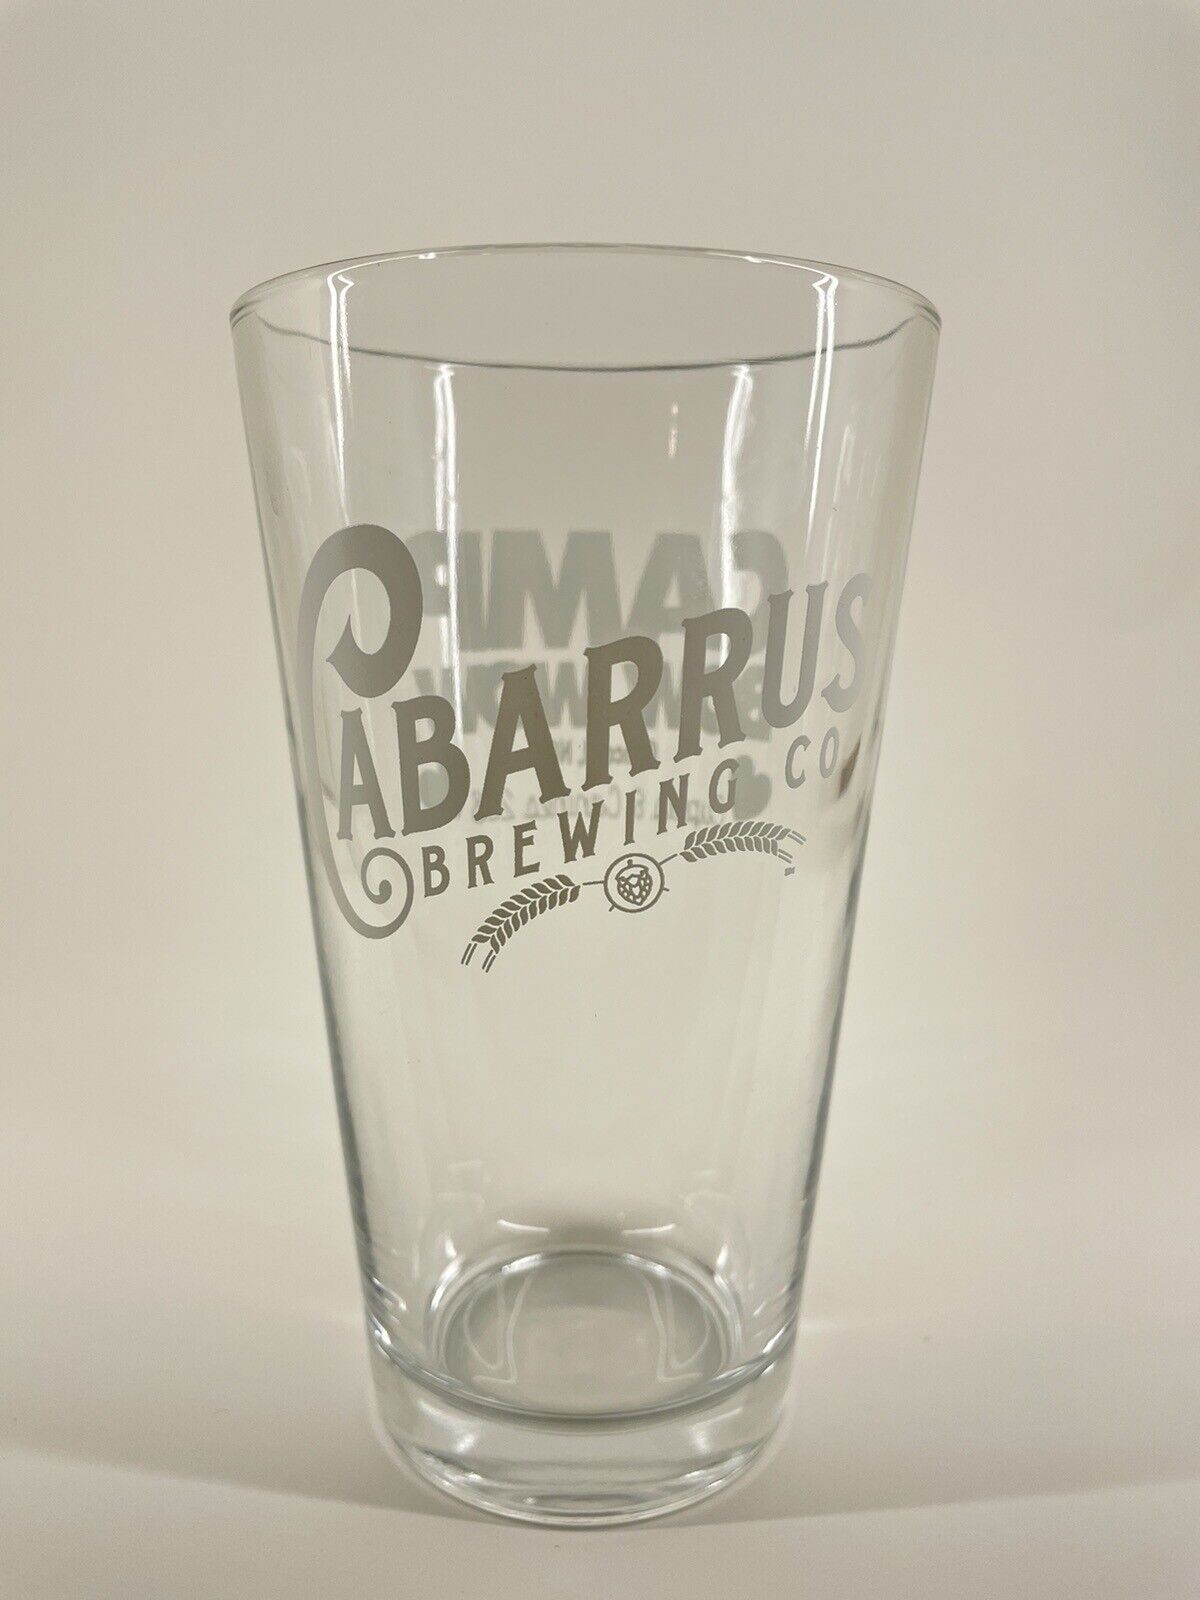 Cabarrus Brewing Pint Beer Glass - Concord NC - Camp Bow Wow